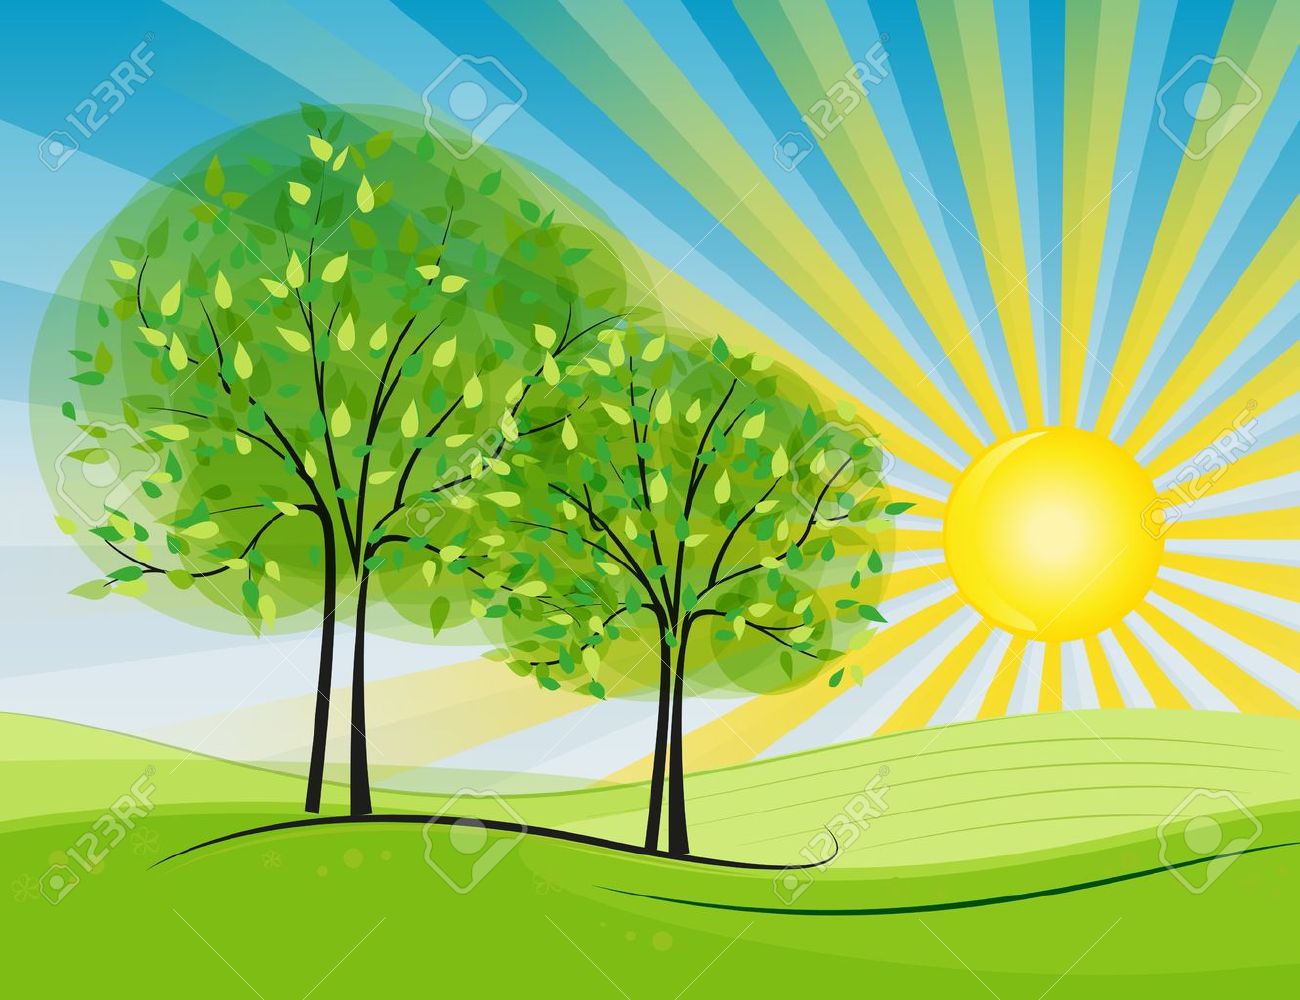 sunny clipart dayclipart